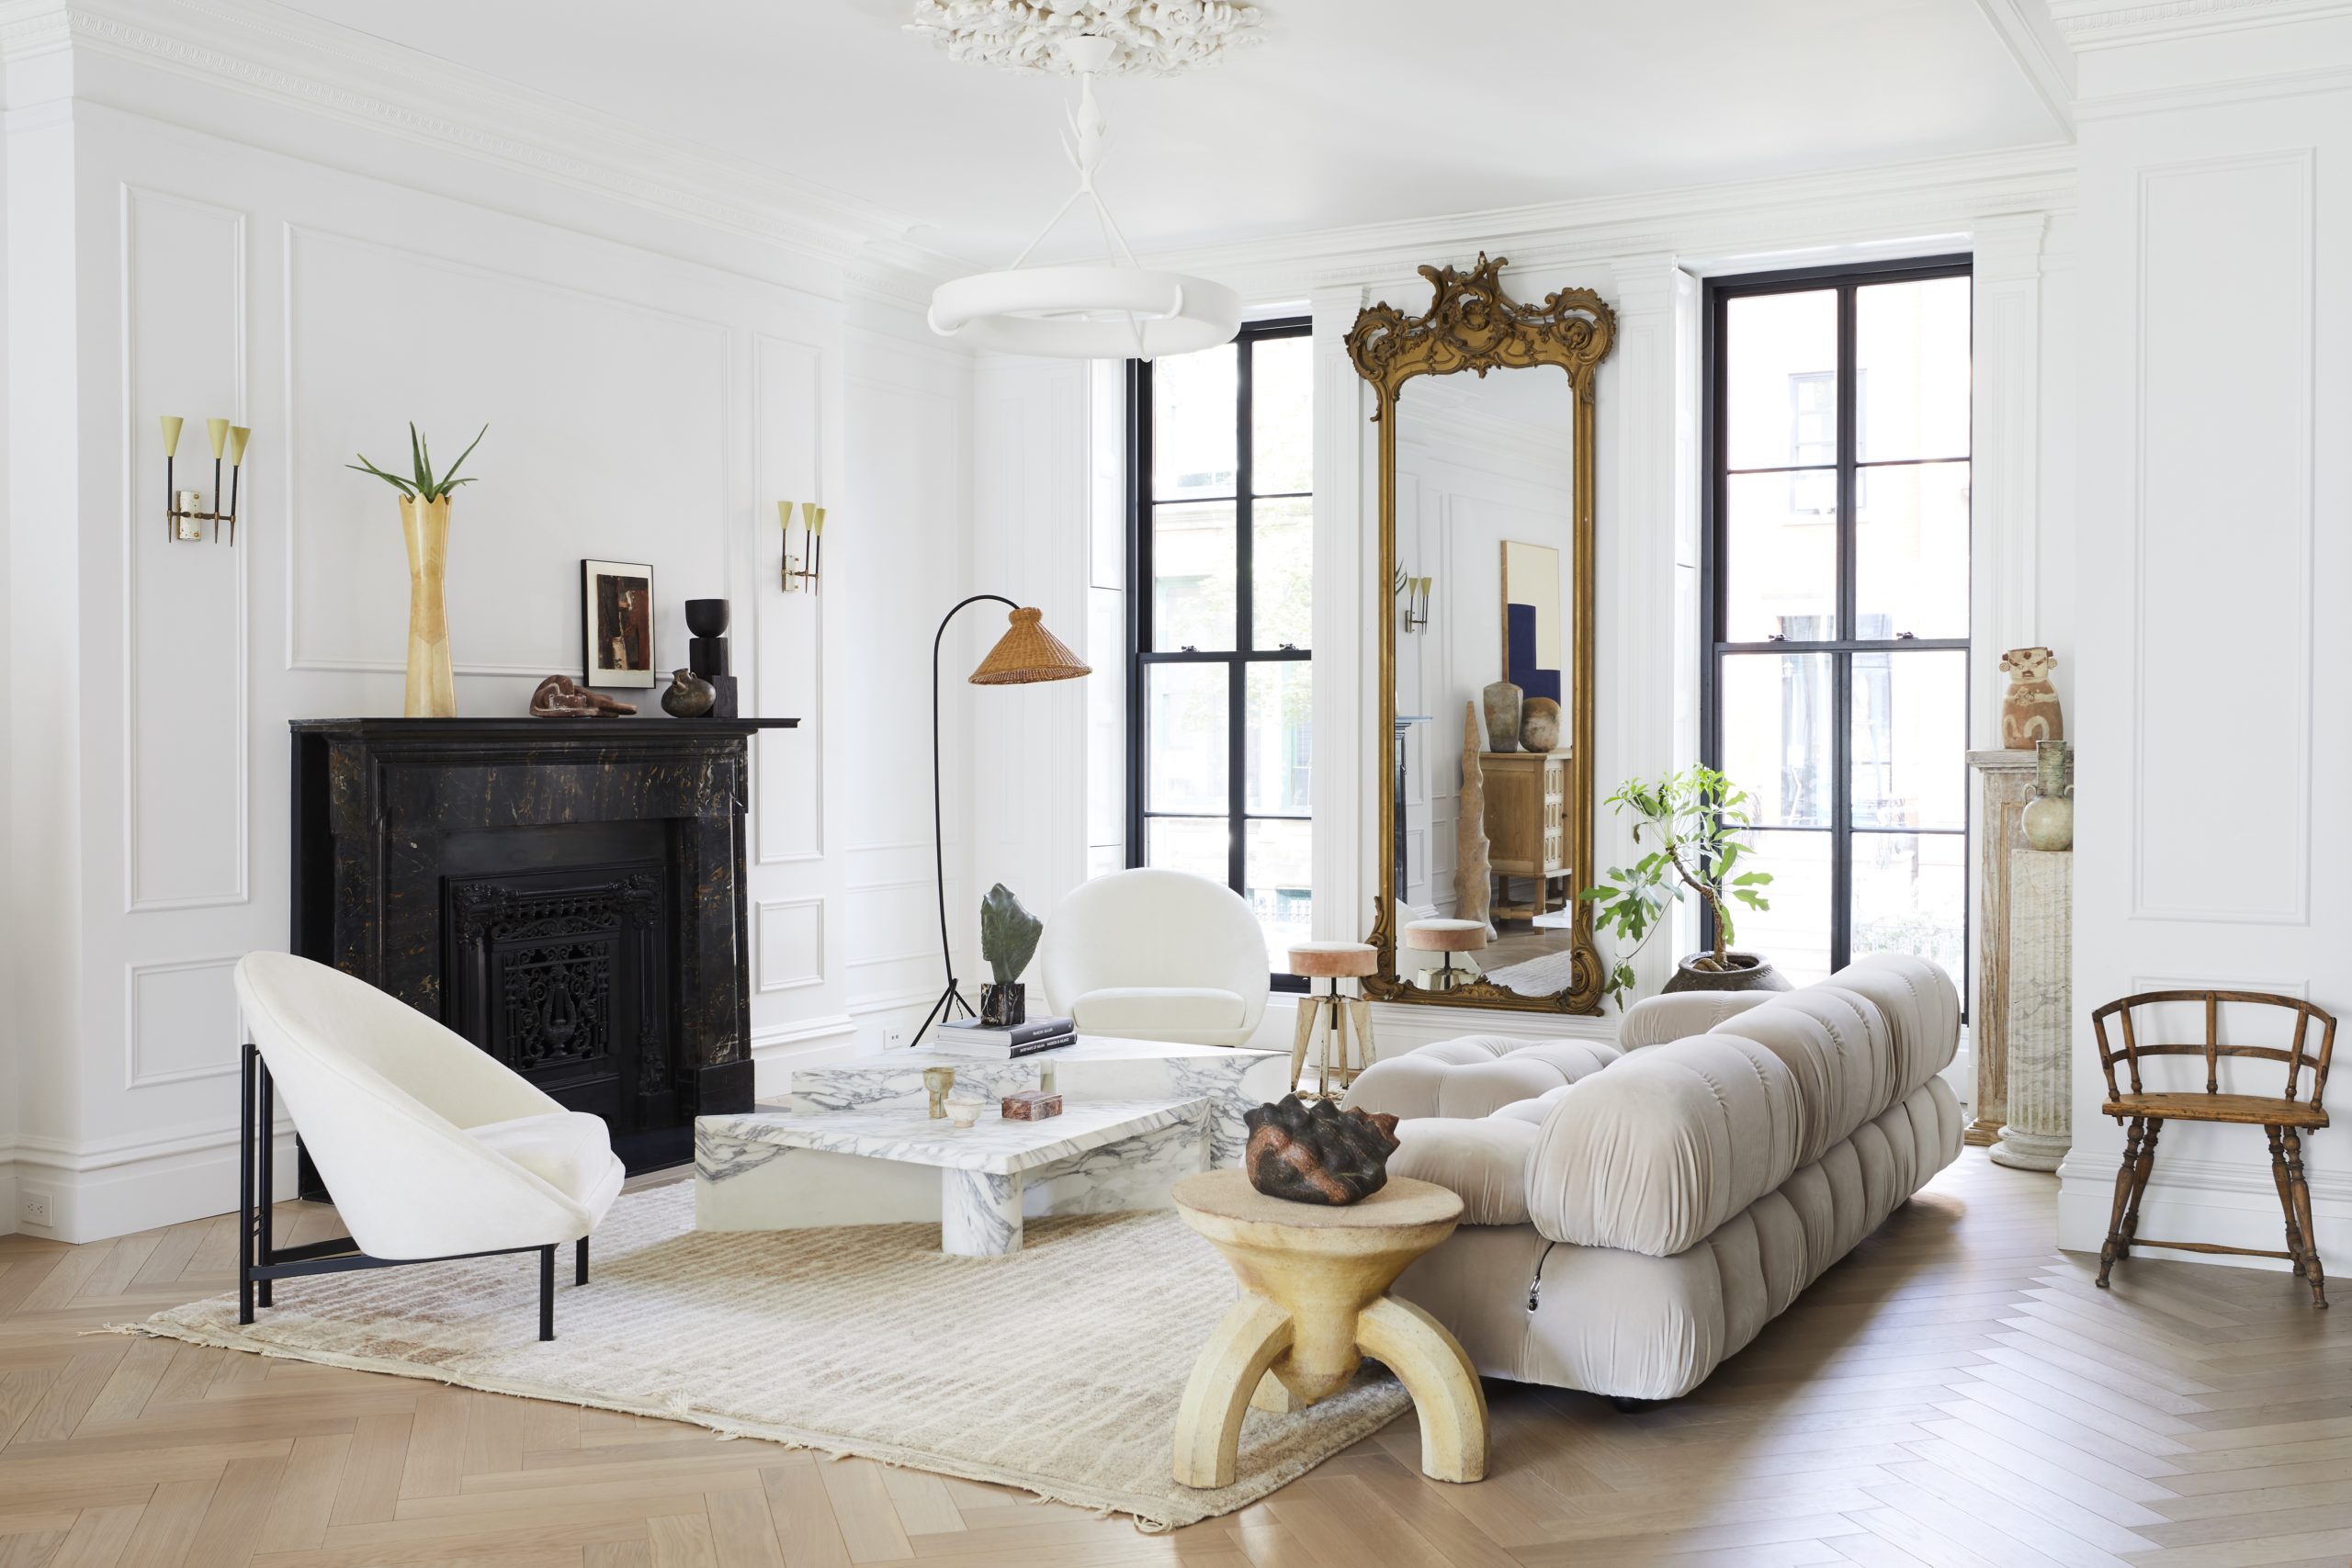 5 Components To Make Any Space More Welcoming - Molly Sims